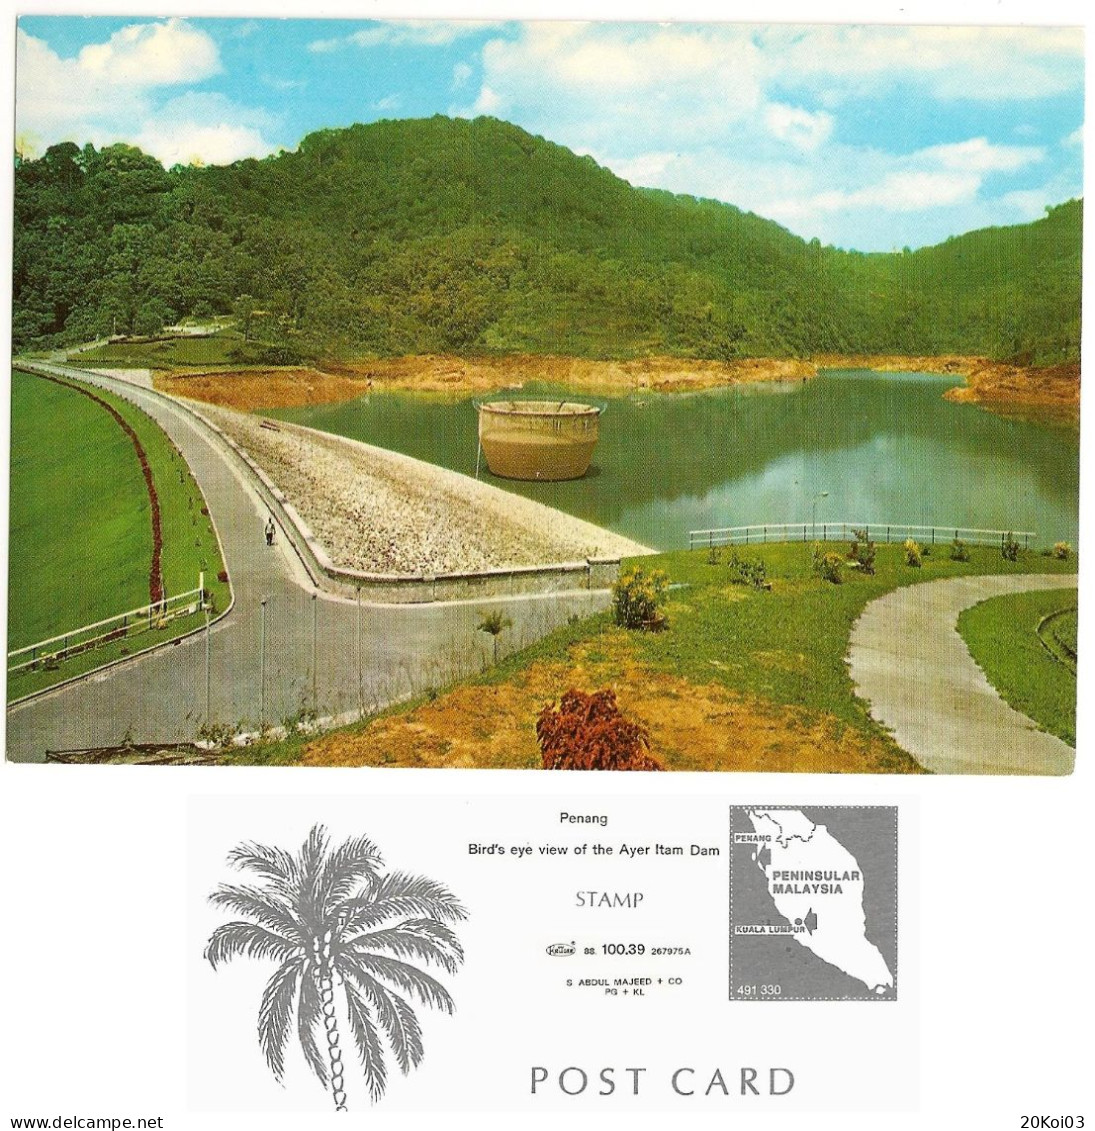 Malaysia Penang Ayer Itam Dam, Bird's Eye View,+/-1975's_UNC_KRUGER. 88_100.39_267975A _S. ABDUL MAJEED + CO_PG + KL_cpc - Maleisië